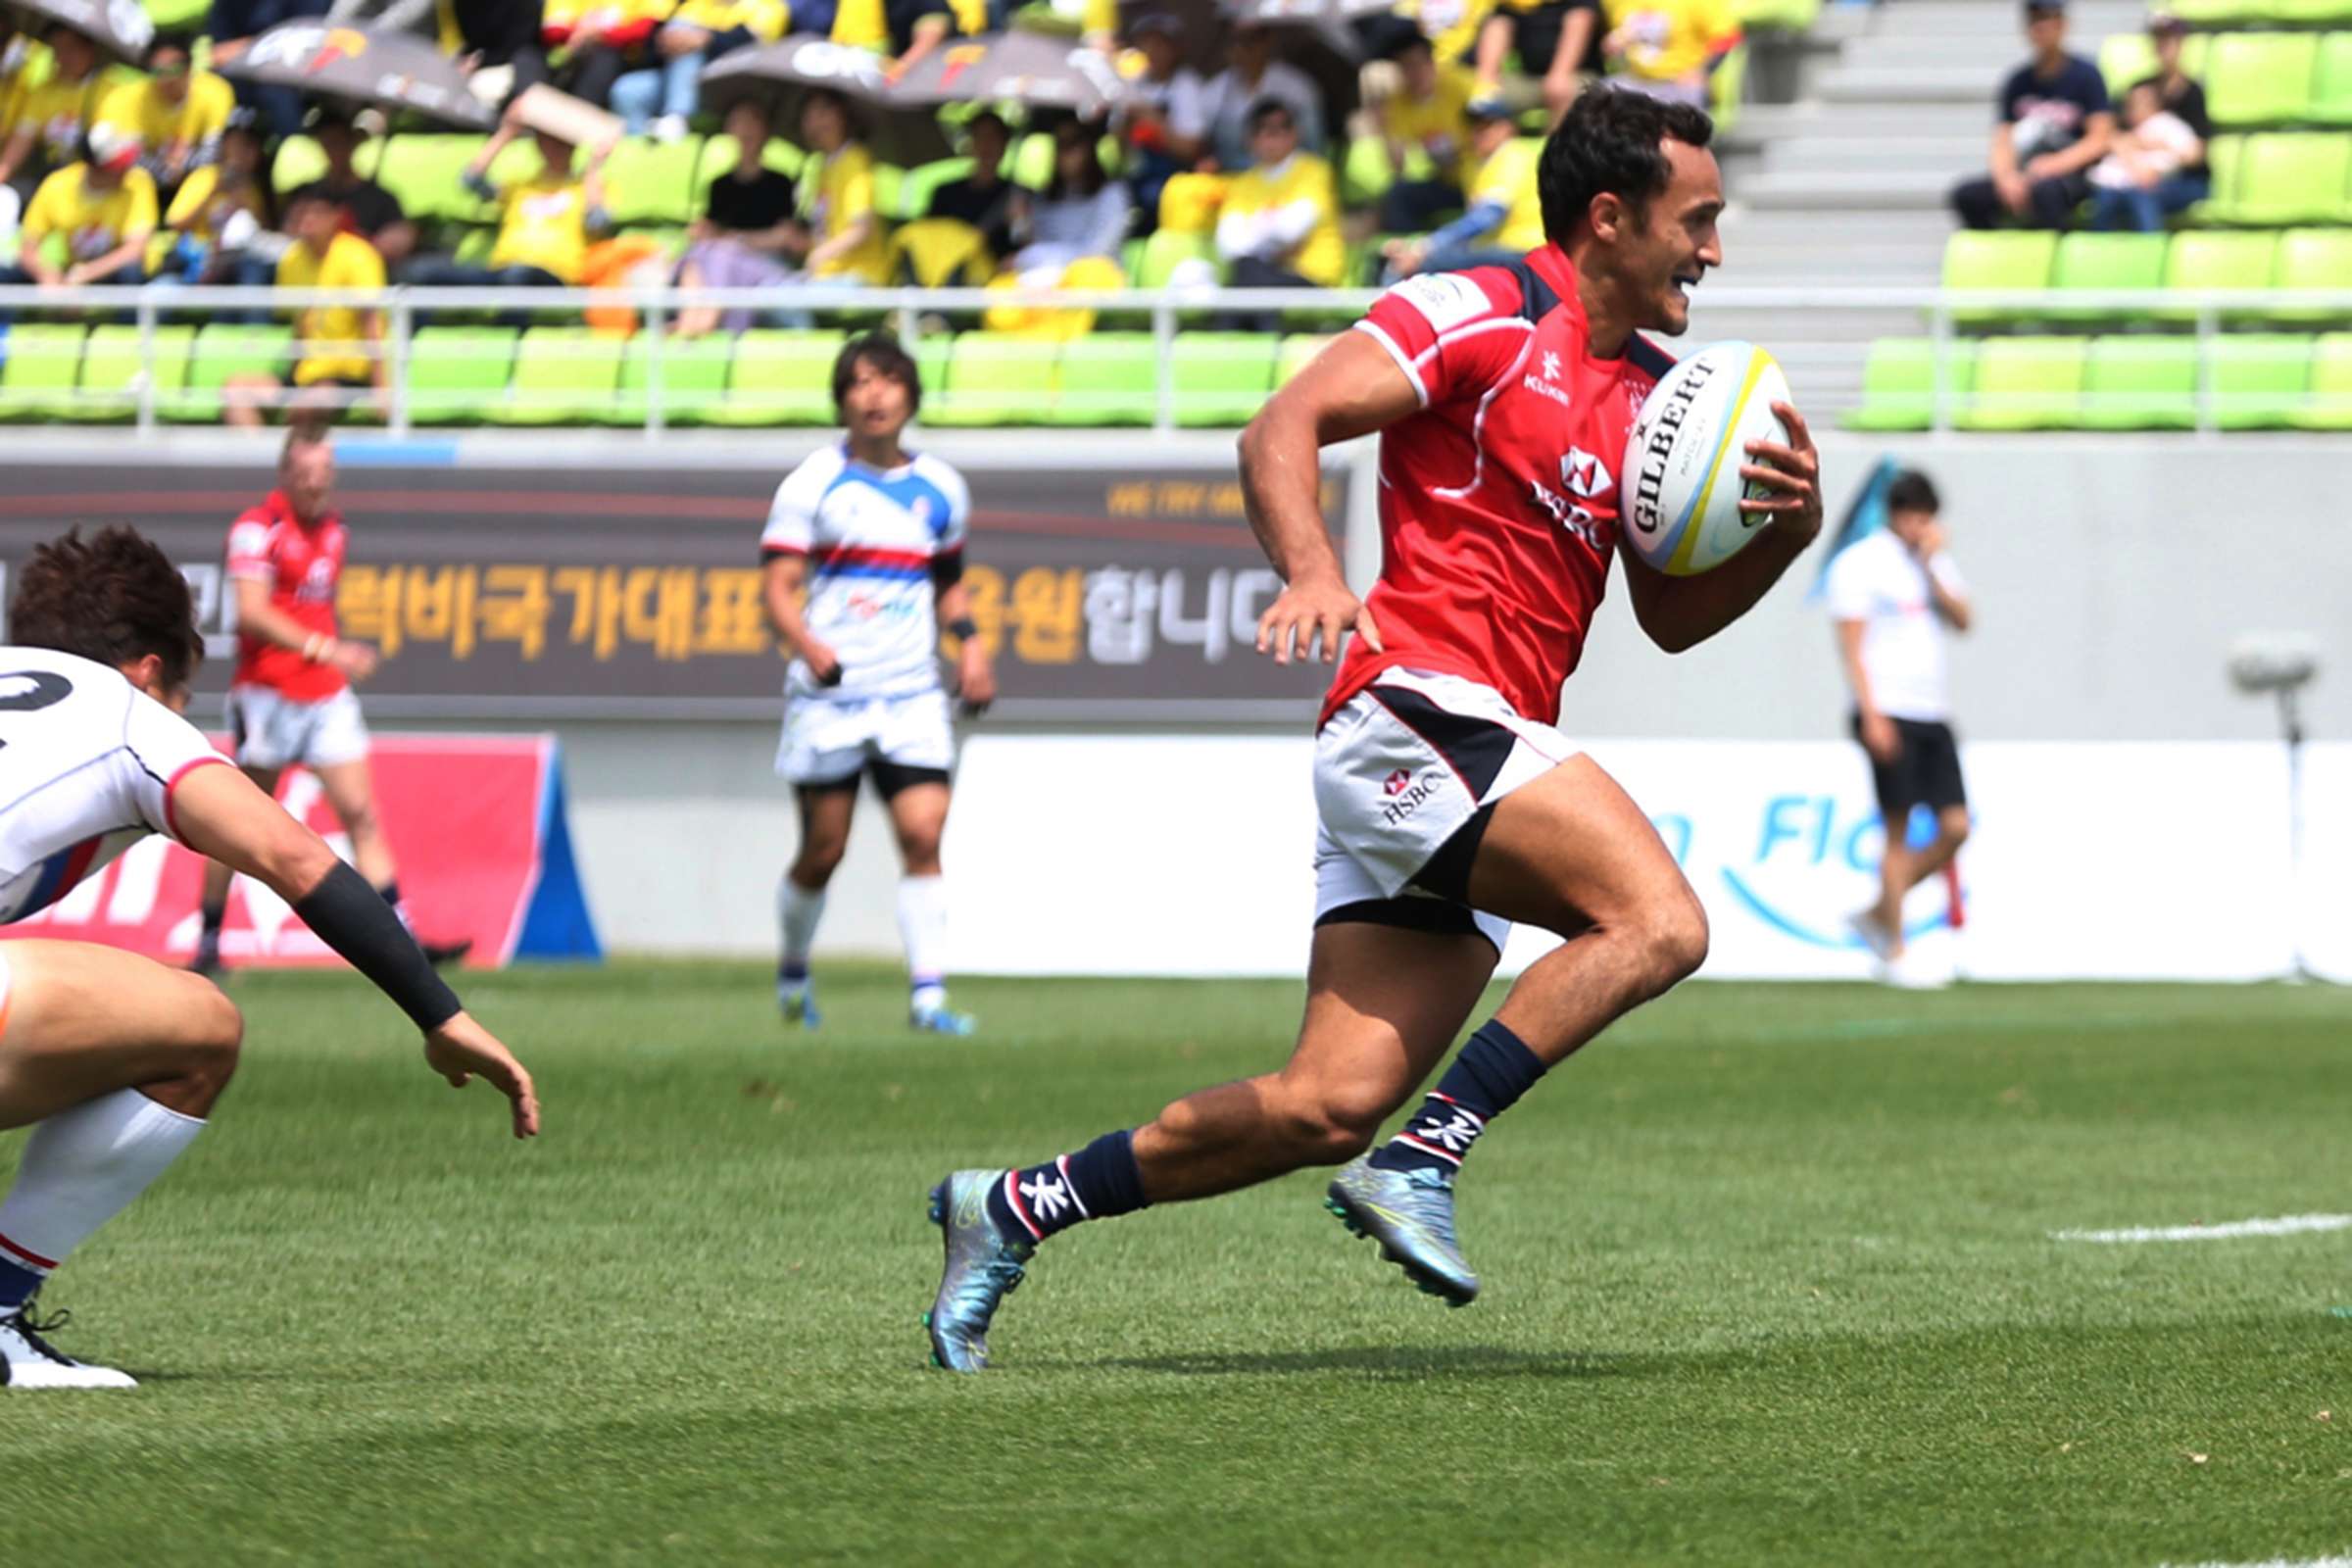 Hong Kong's Ben Rimene collects his chip and chase to score the game-winner against South Korea. Photo: Kenji Demura/RJP